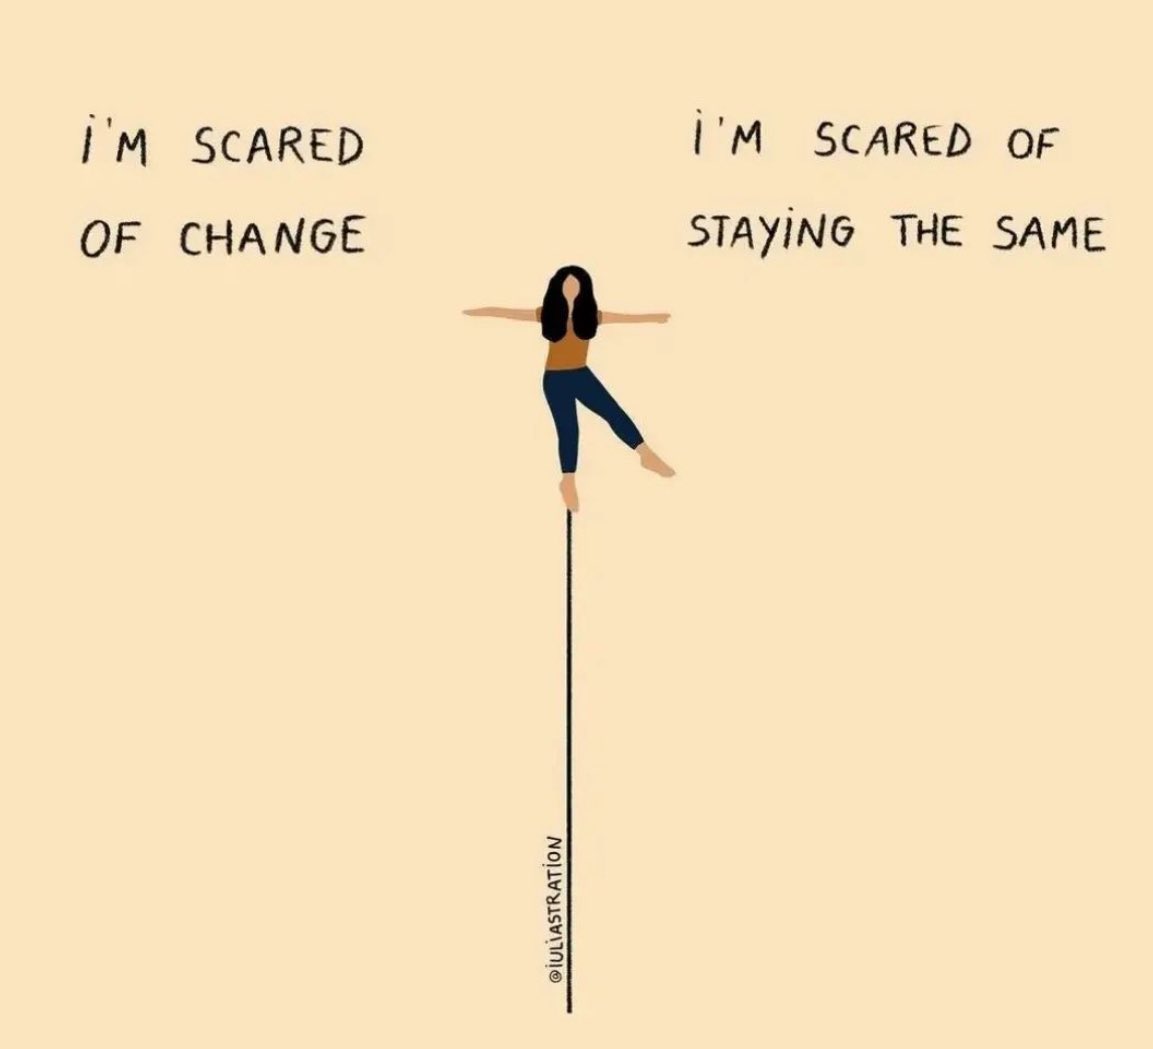 Change is scary, but staying in the same place can really be scary too. No room to grow, embrace new beginnings, and chase your dreams! #changeyourthoughts #chaseyourdreams #changecanbegood #theolivebranchcounselingcenter